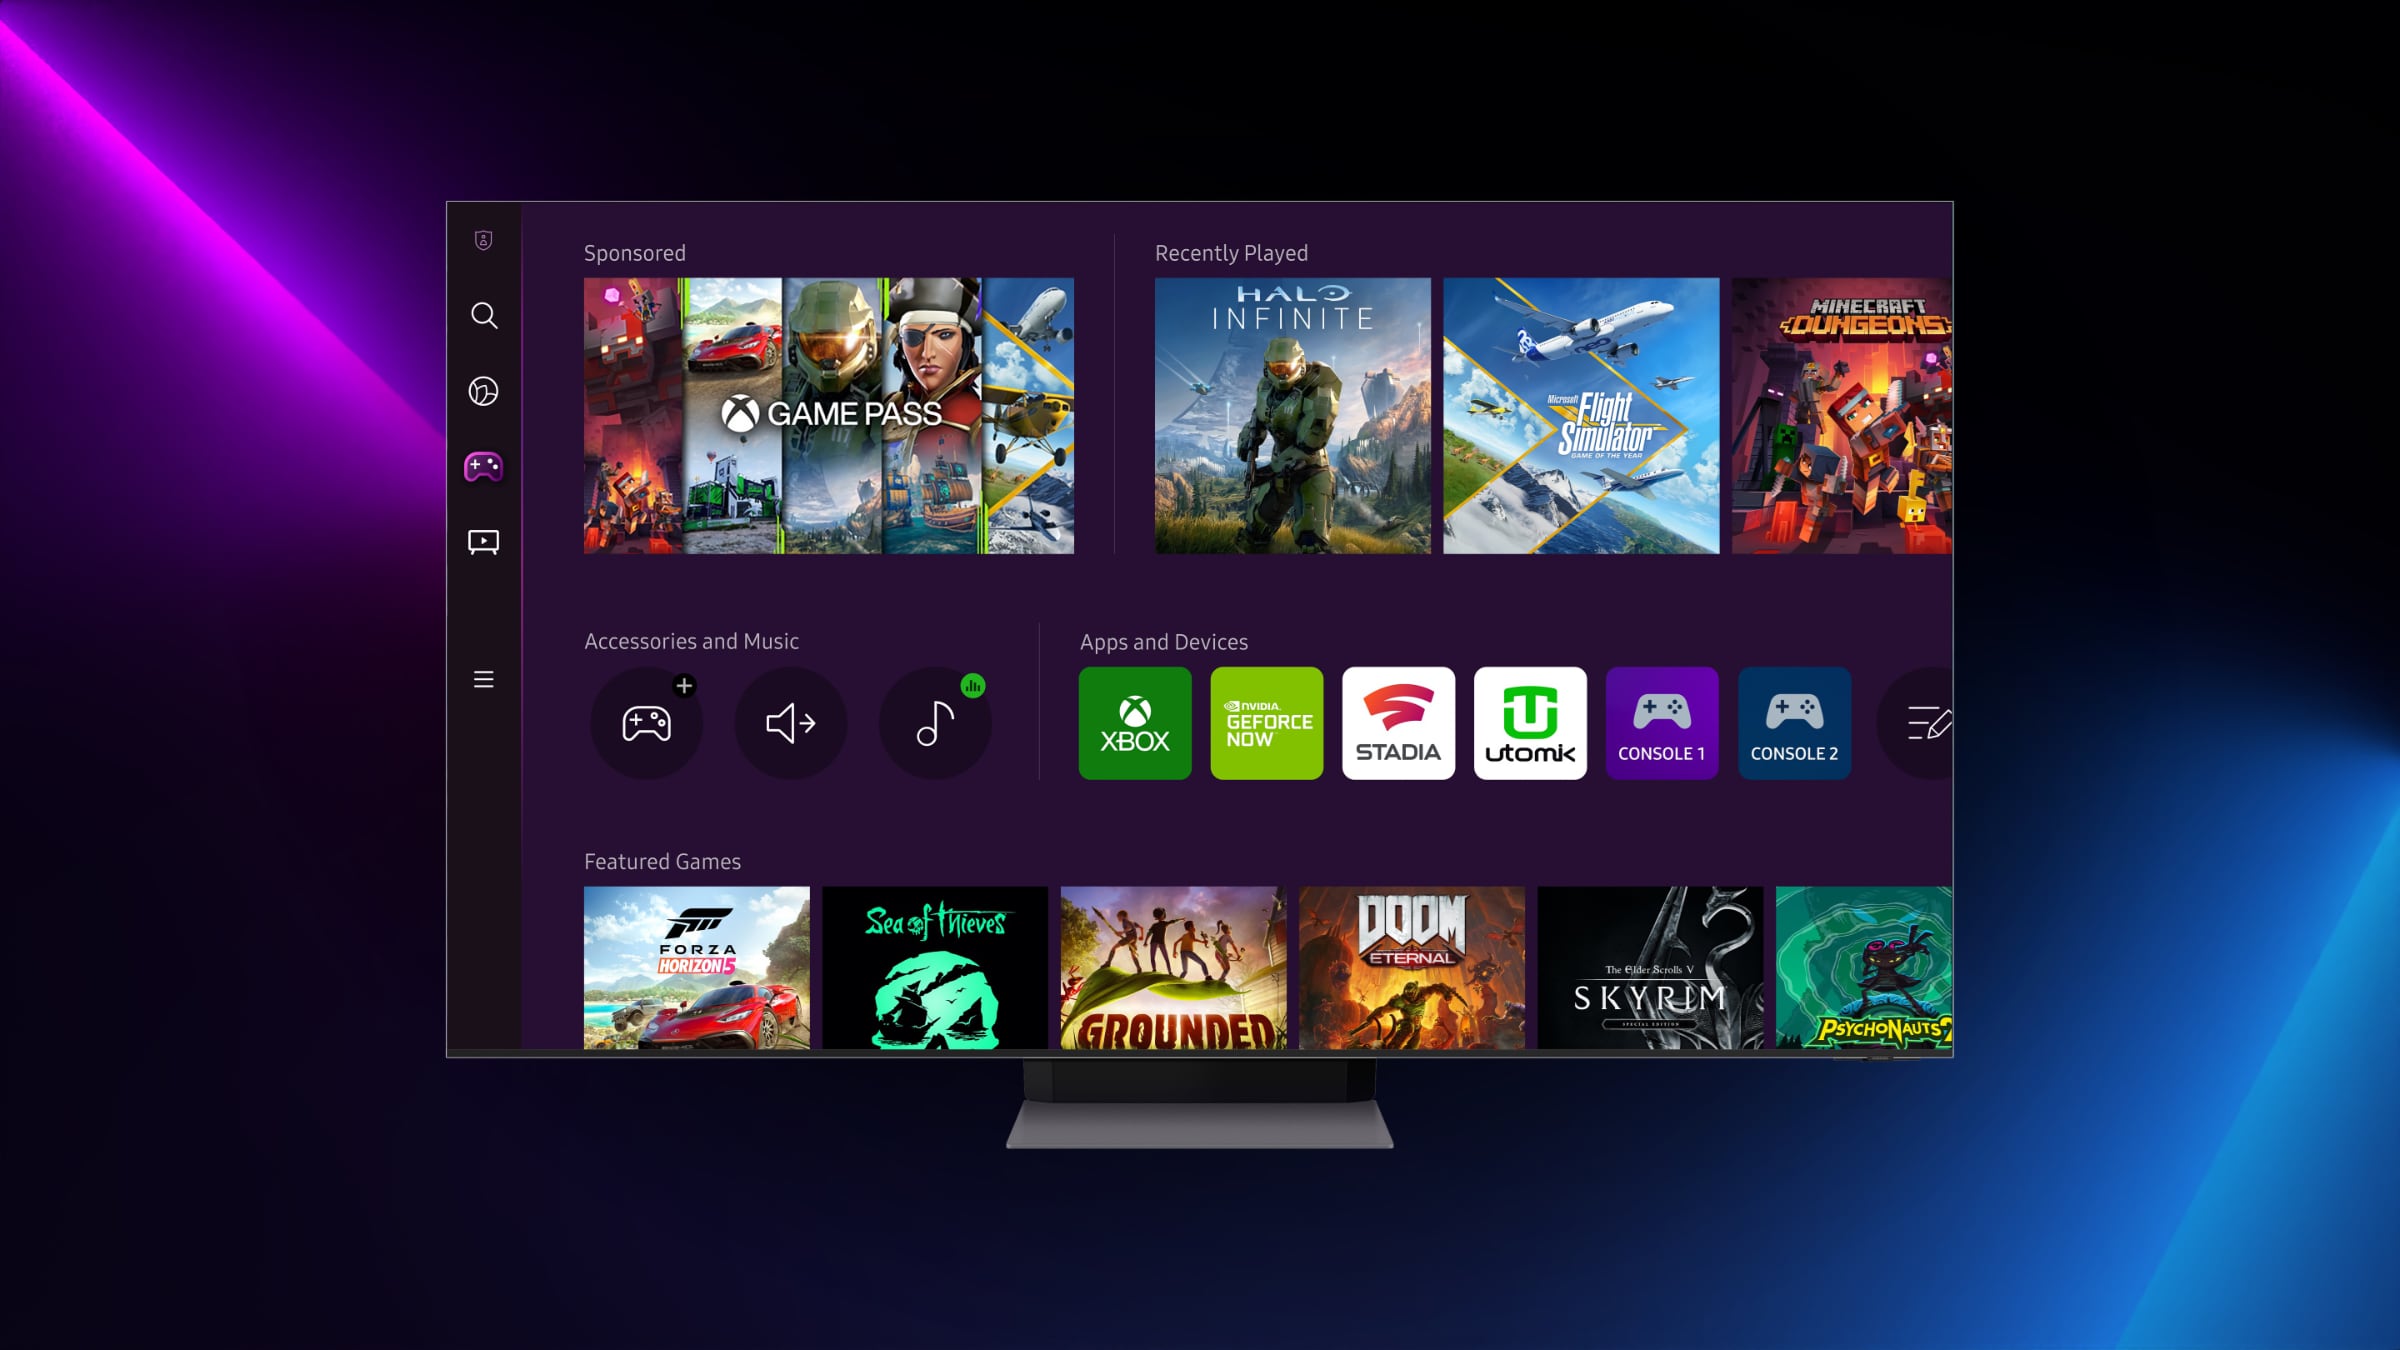 Xbox confirms it's working on streaming devices, TV apps for Cloud